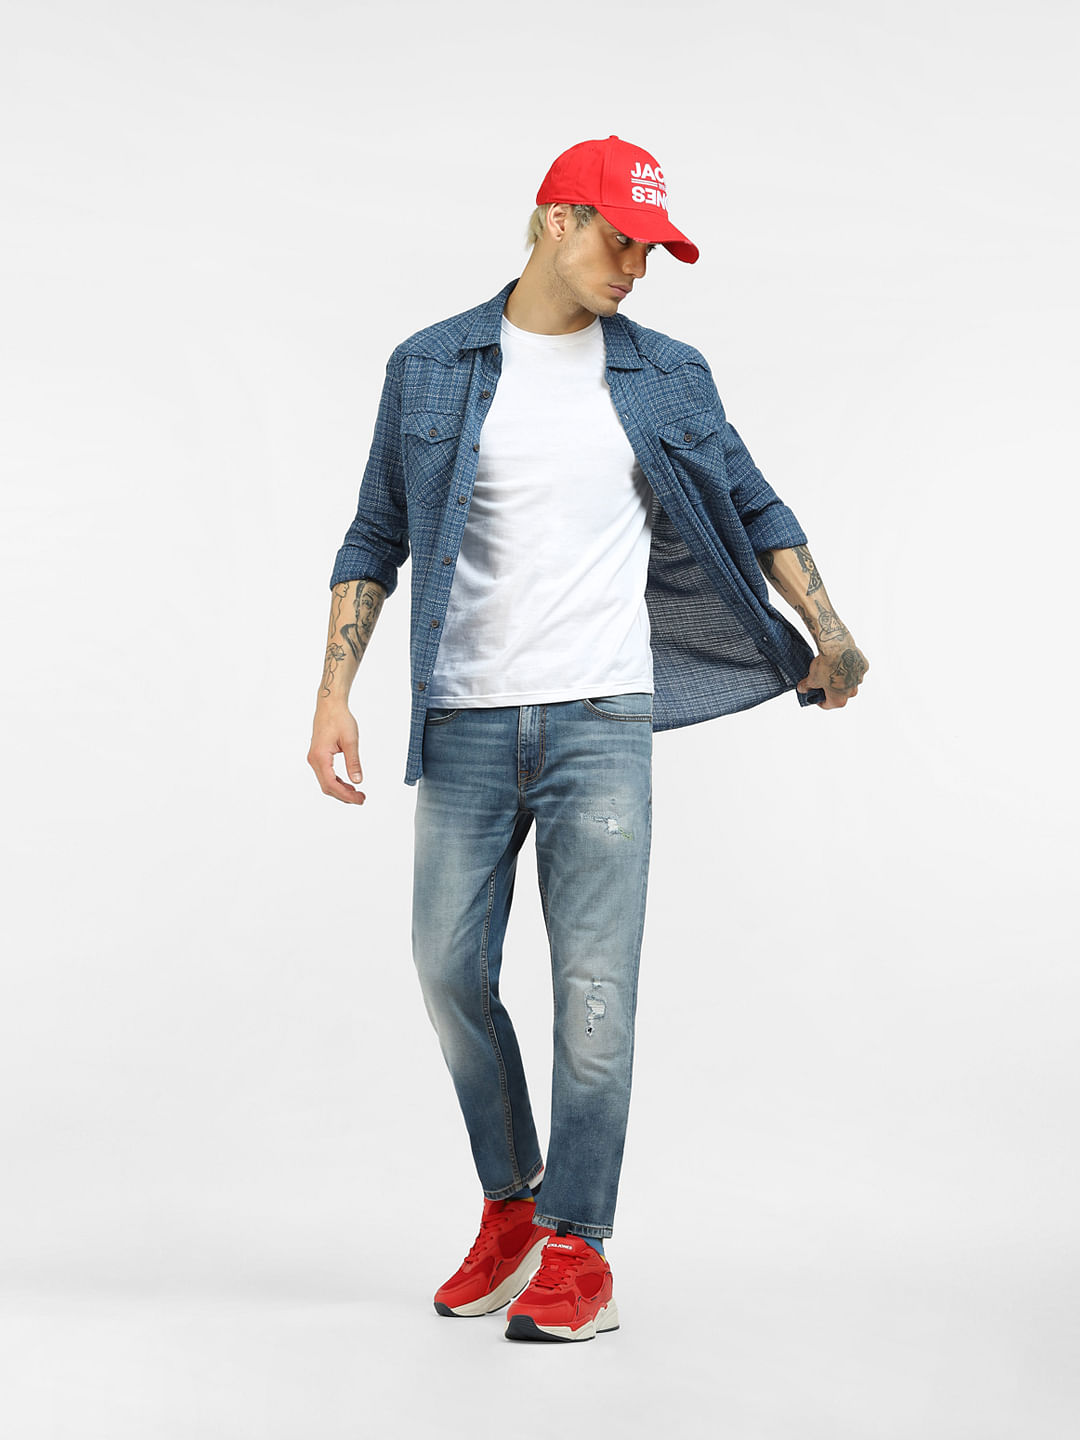 Ripped and destroyed | Denim inspiration, Denim fashion, Men fashion casual  outfits